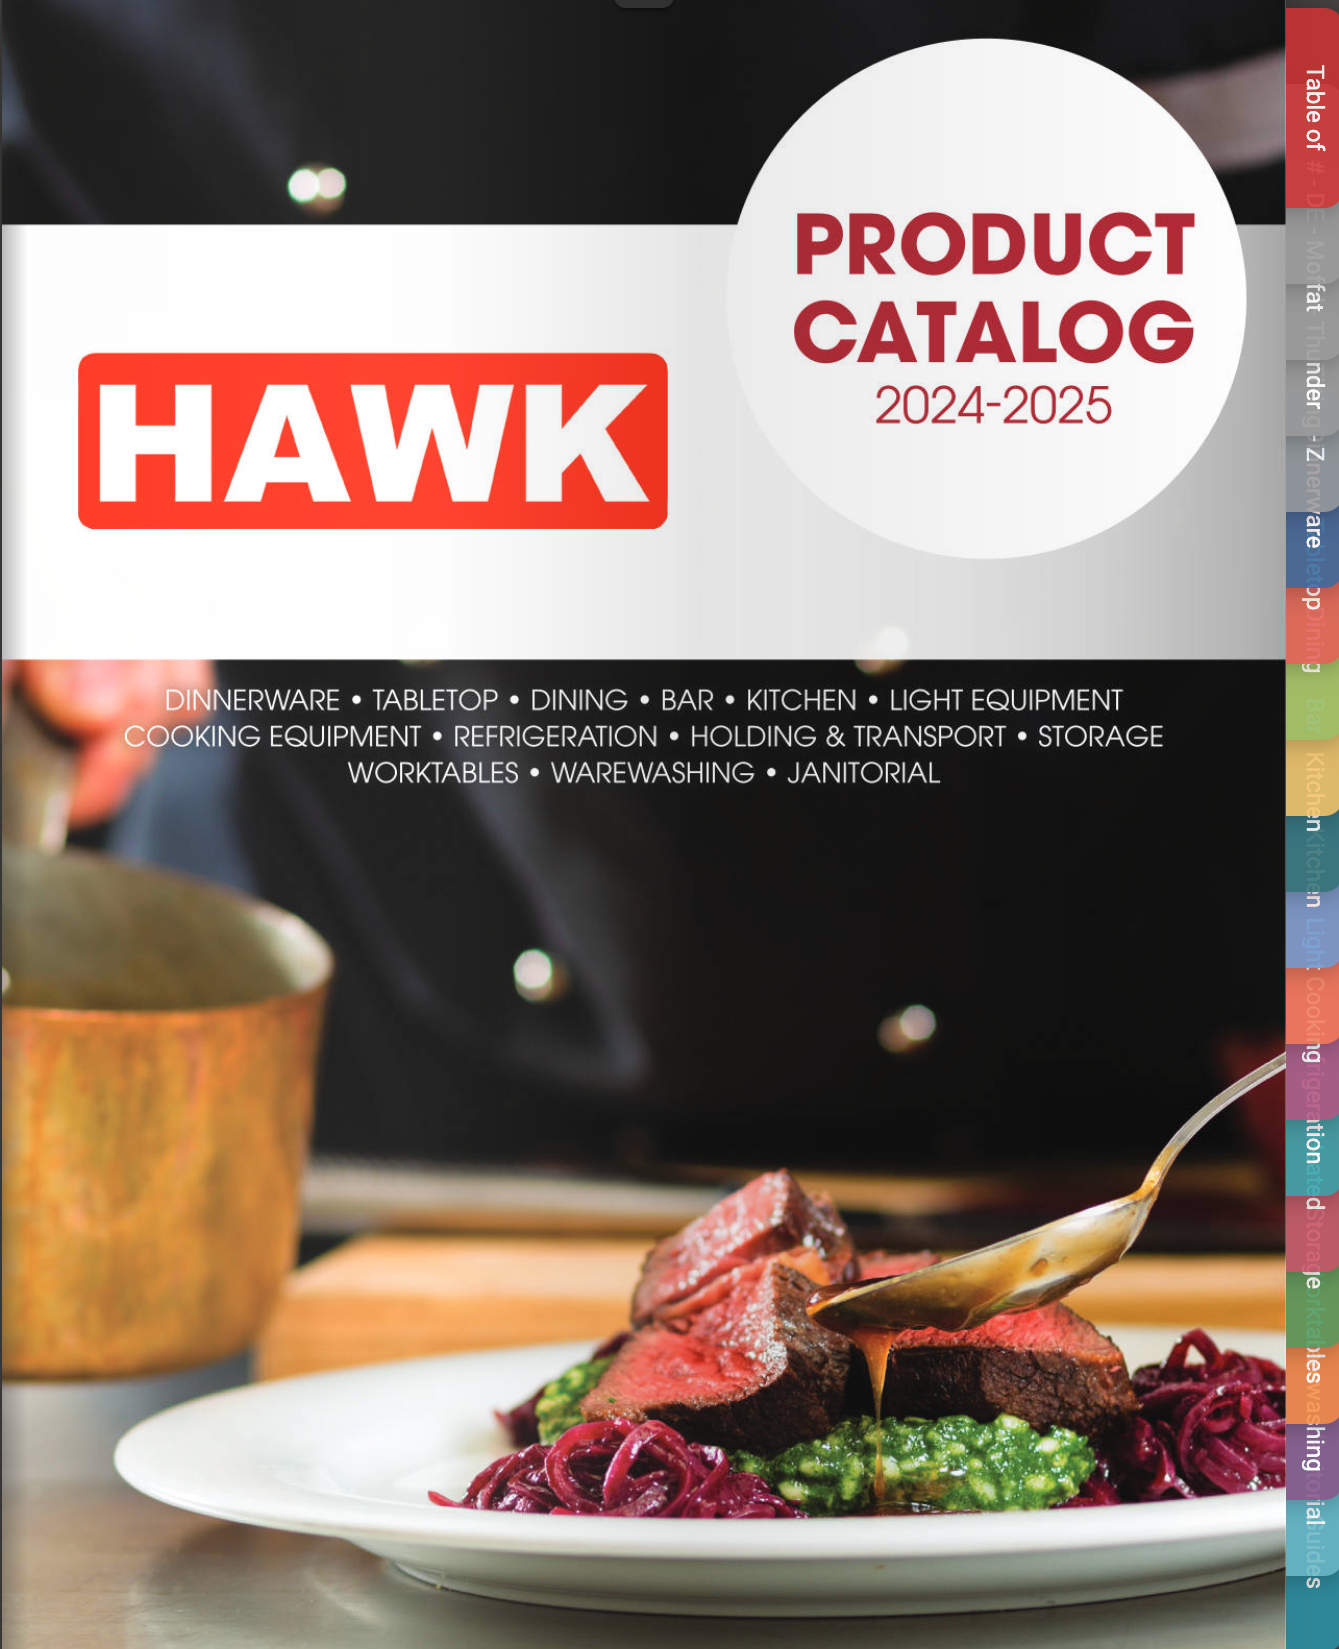 a product catalog for hawk shows a plate of food with a spoon in it .